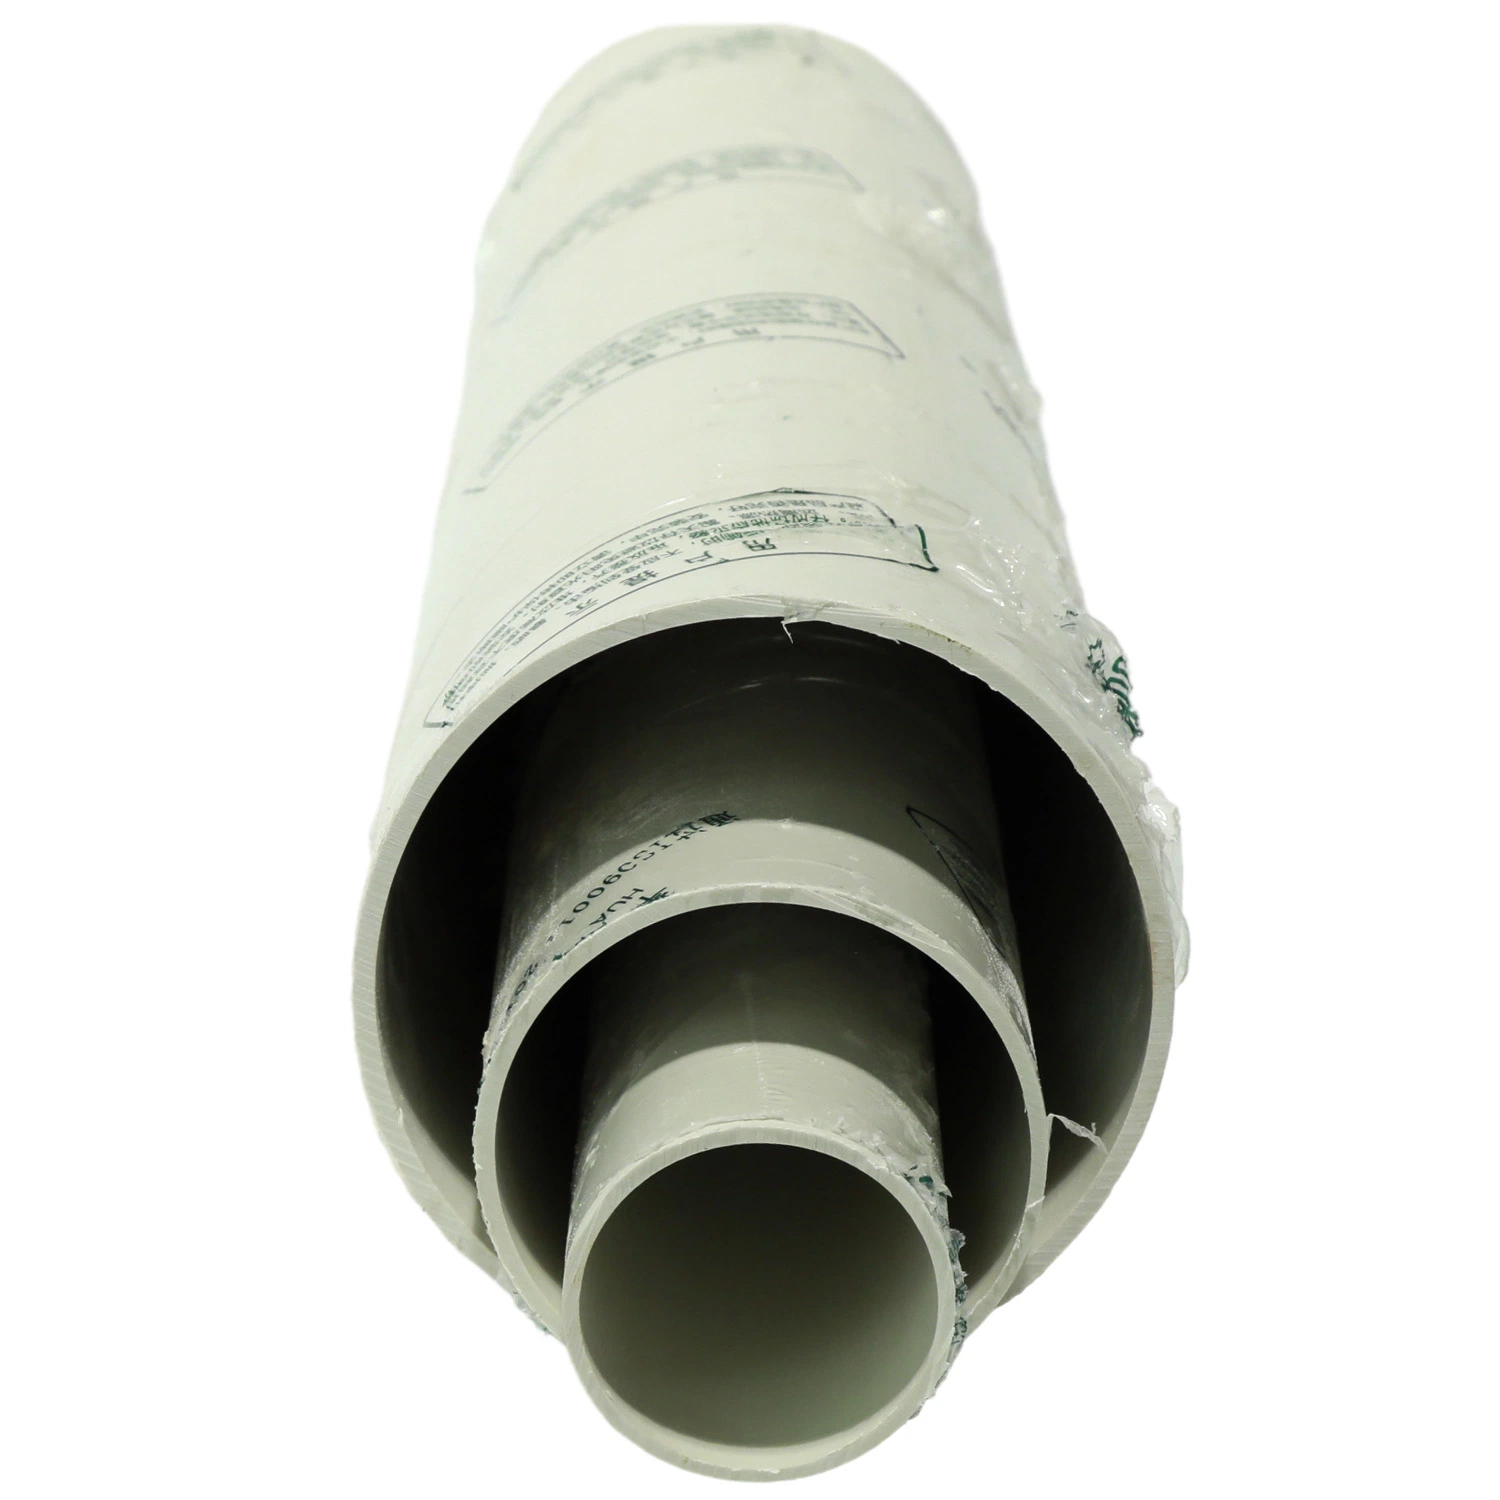 Rubber/Glue Connection PVC/UPVC/MPVC Pipe Water Tube PVC Pipe for Water Supply/Irrigation/Sewer Drainage